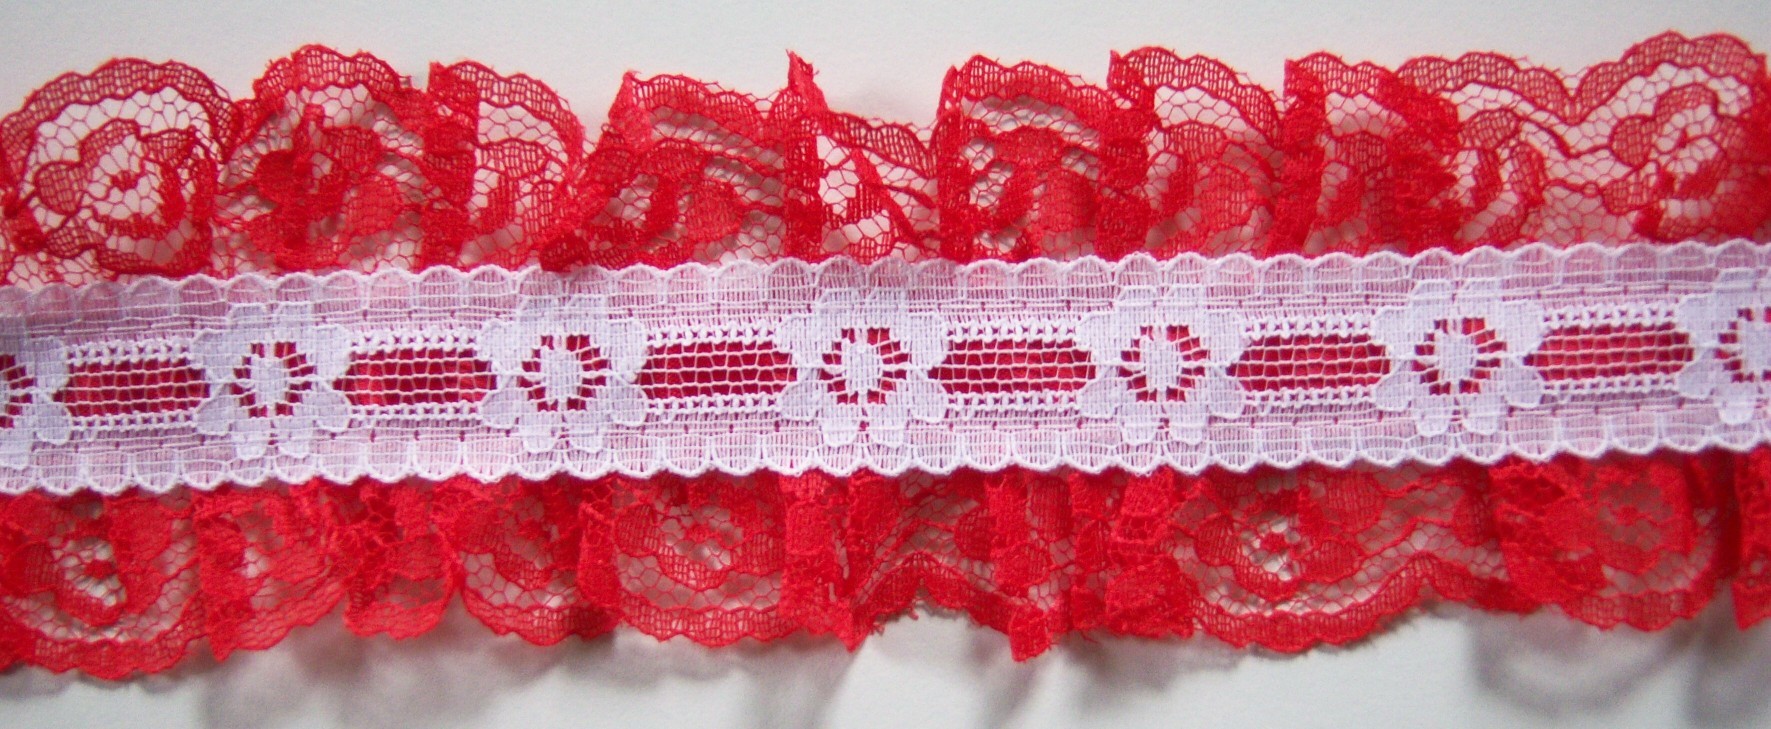 Red/White Ruffled 2 3/8" Lace